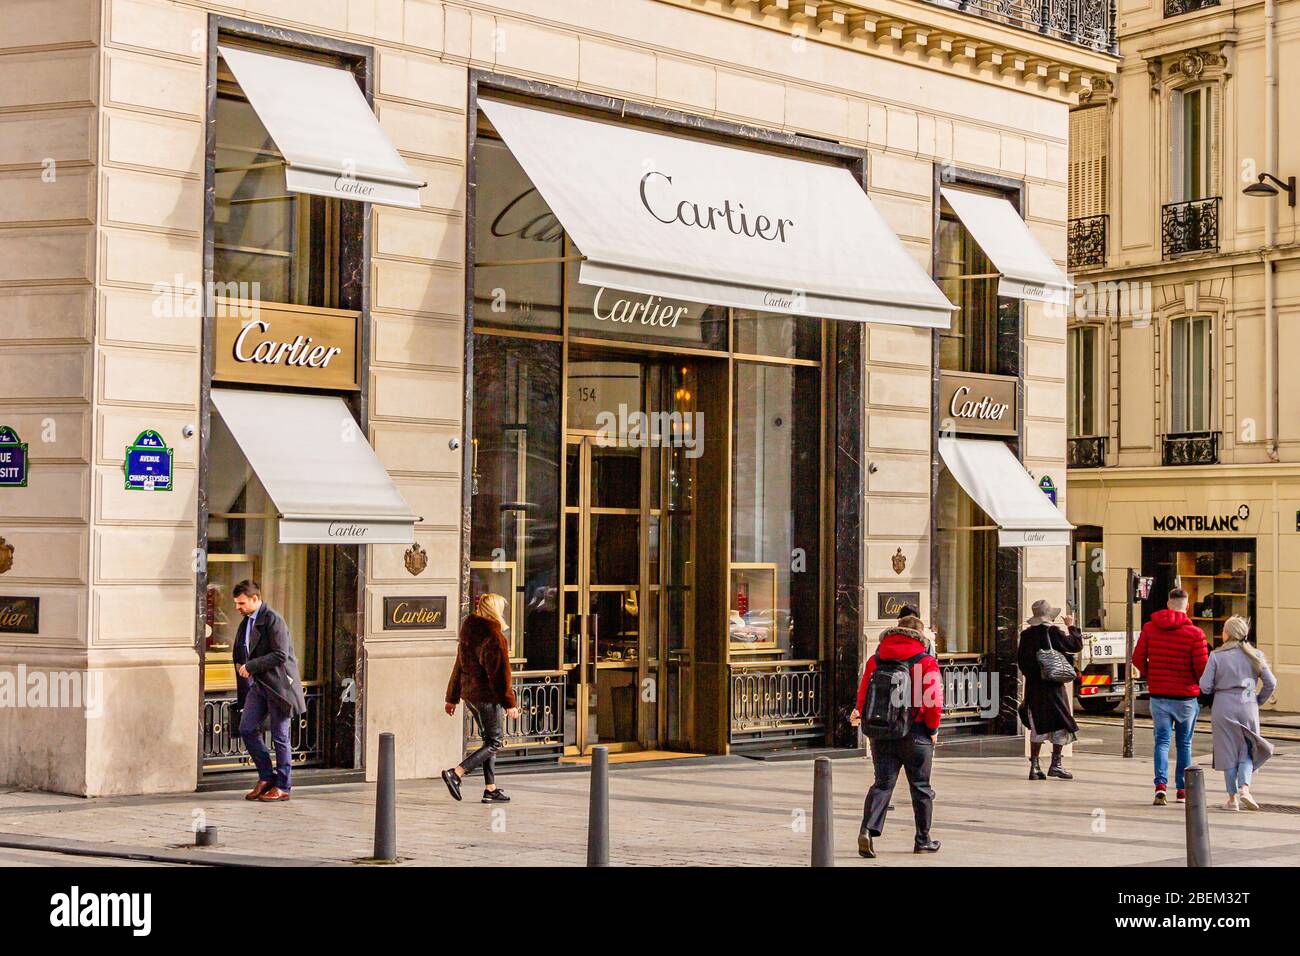 Luxury goods shop Cartier on the Champs Elysees, Paris, France. February 2020. Stock Photo